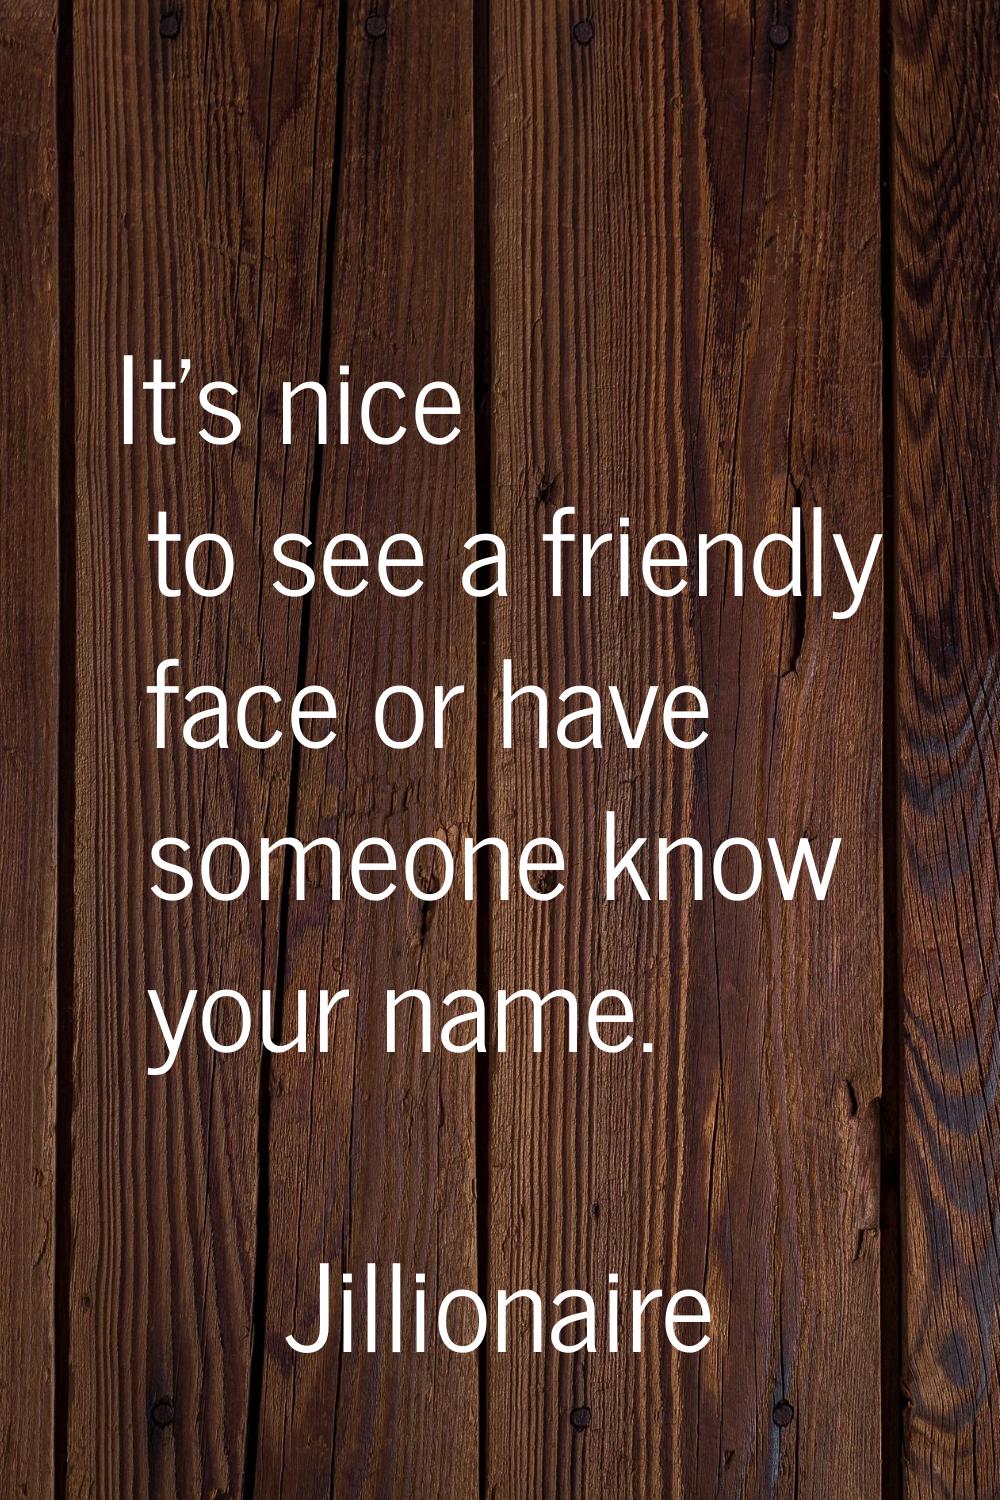 It's nice to see a friendly face or have someone know your name.